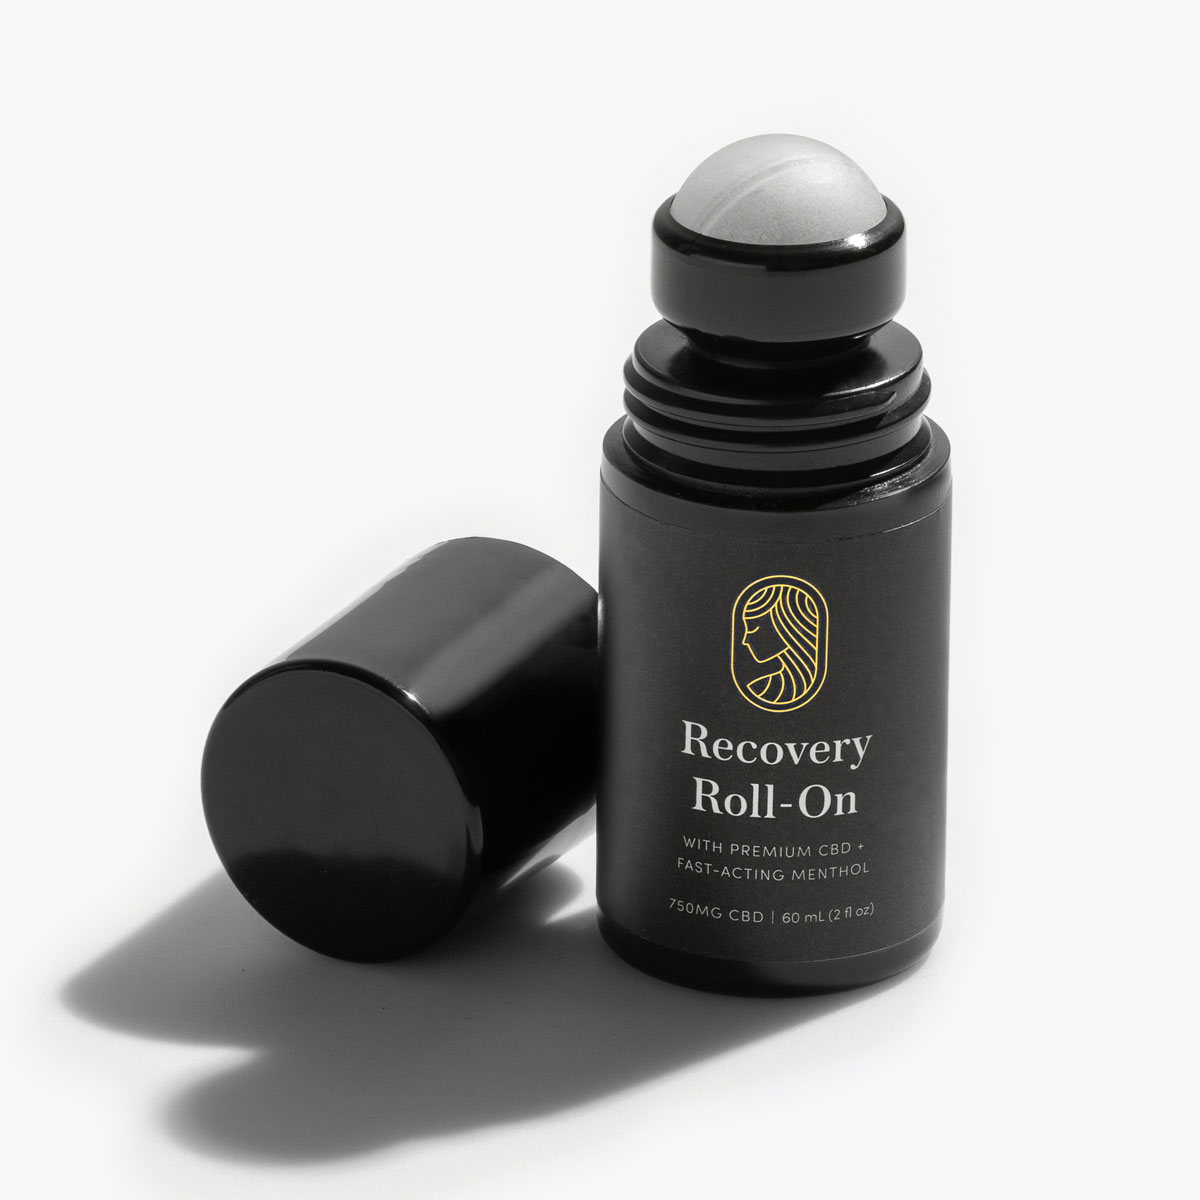 Black Recovery Roll-On container with lid off on black background.